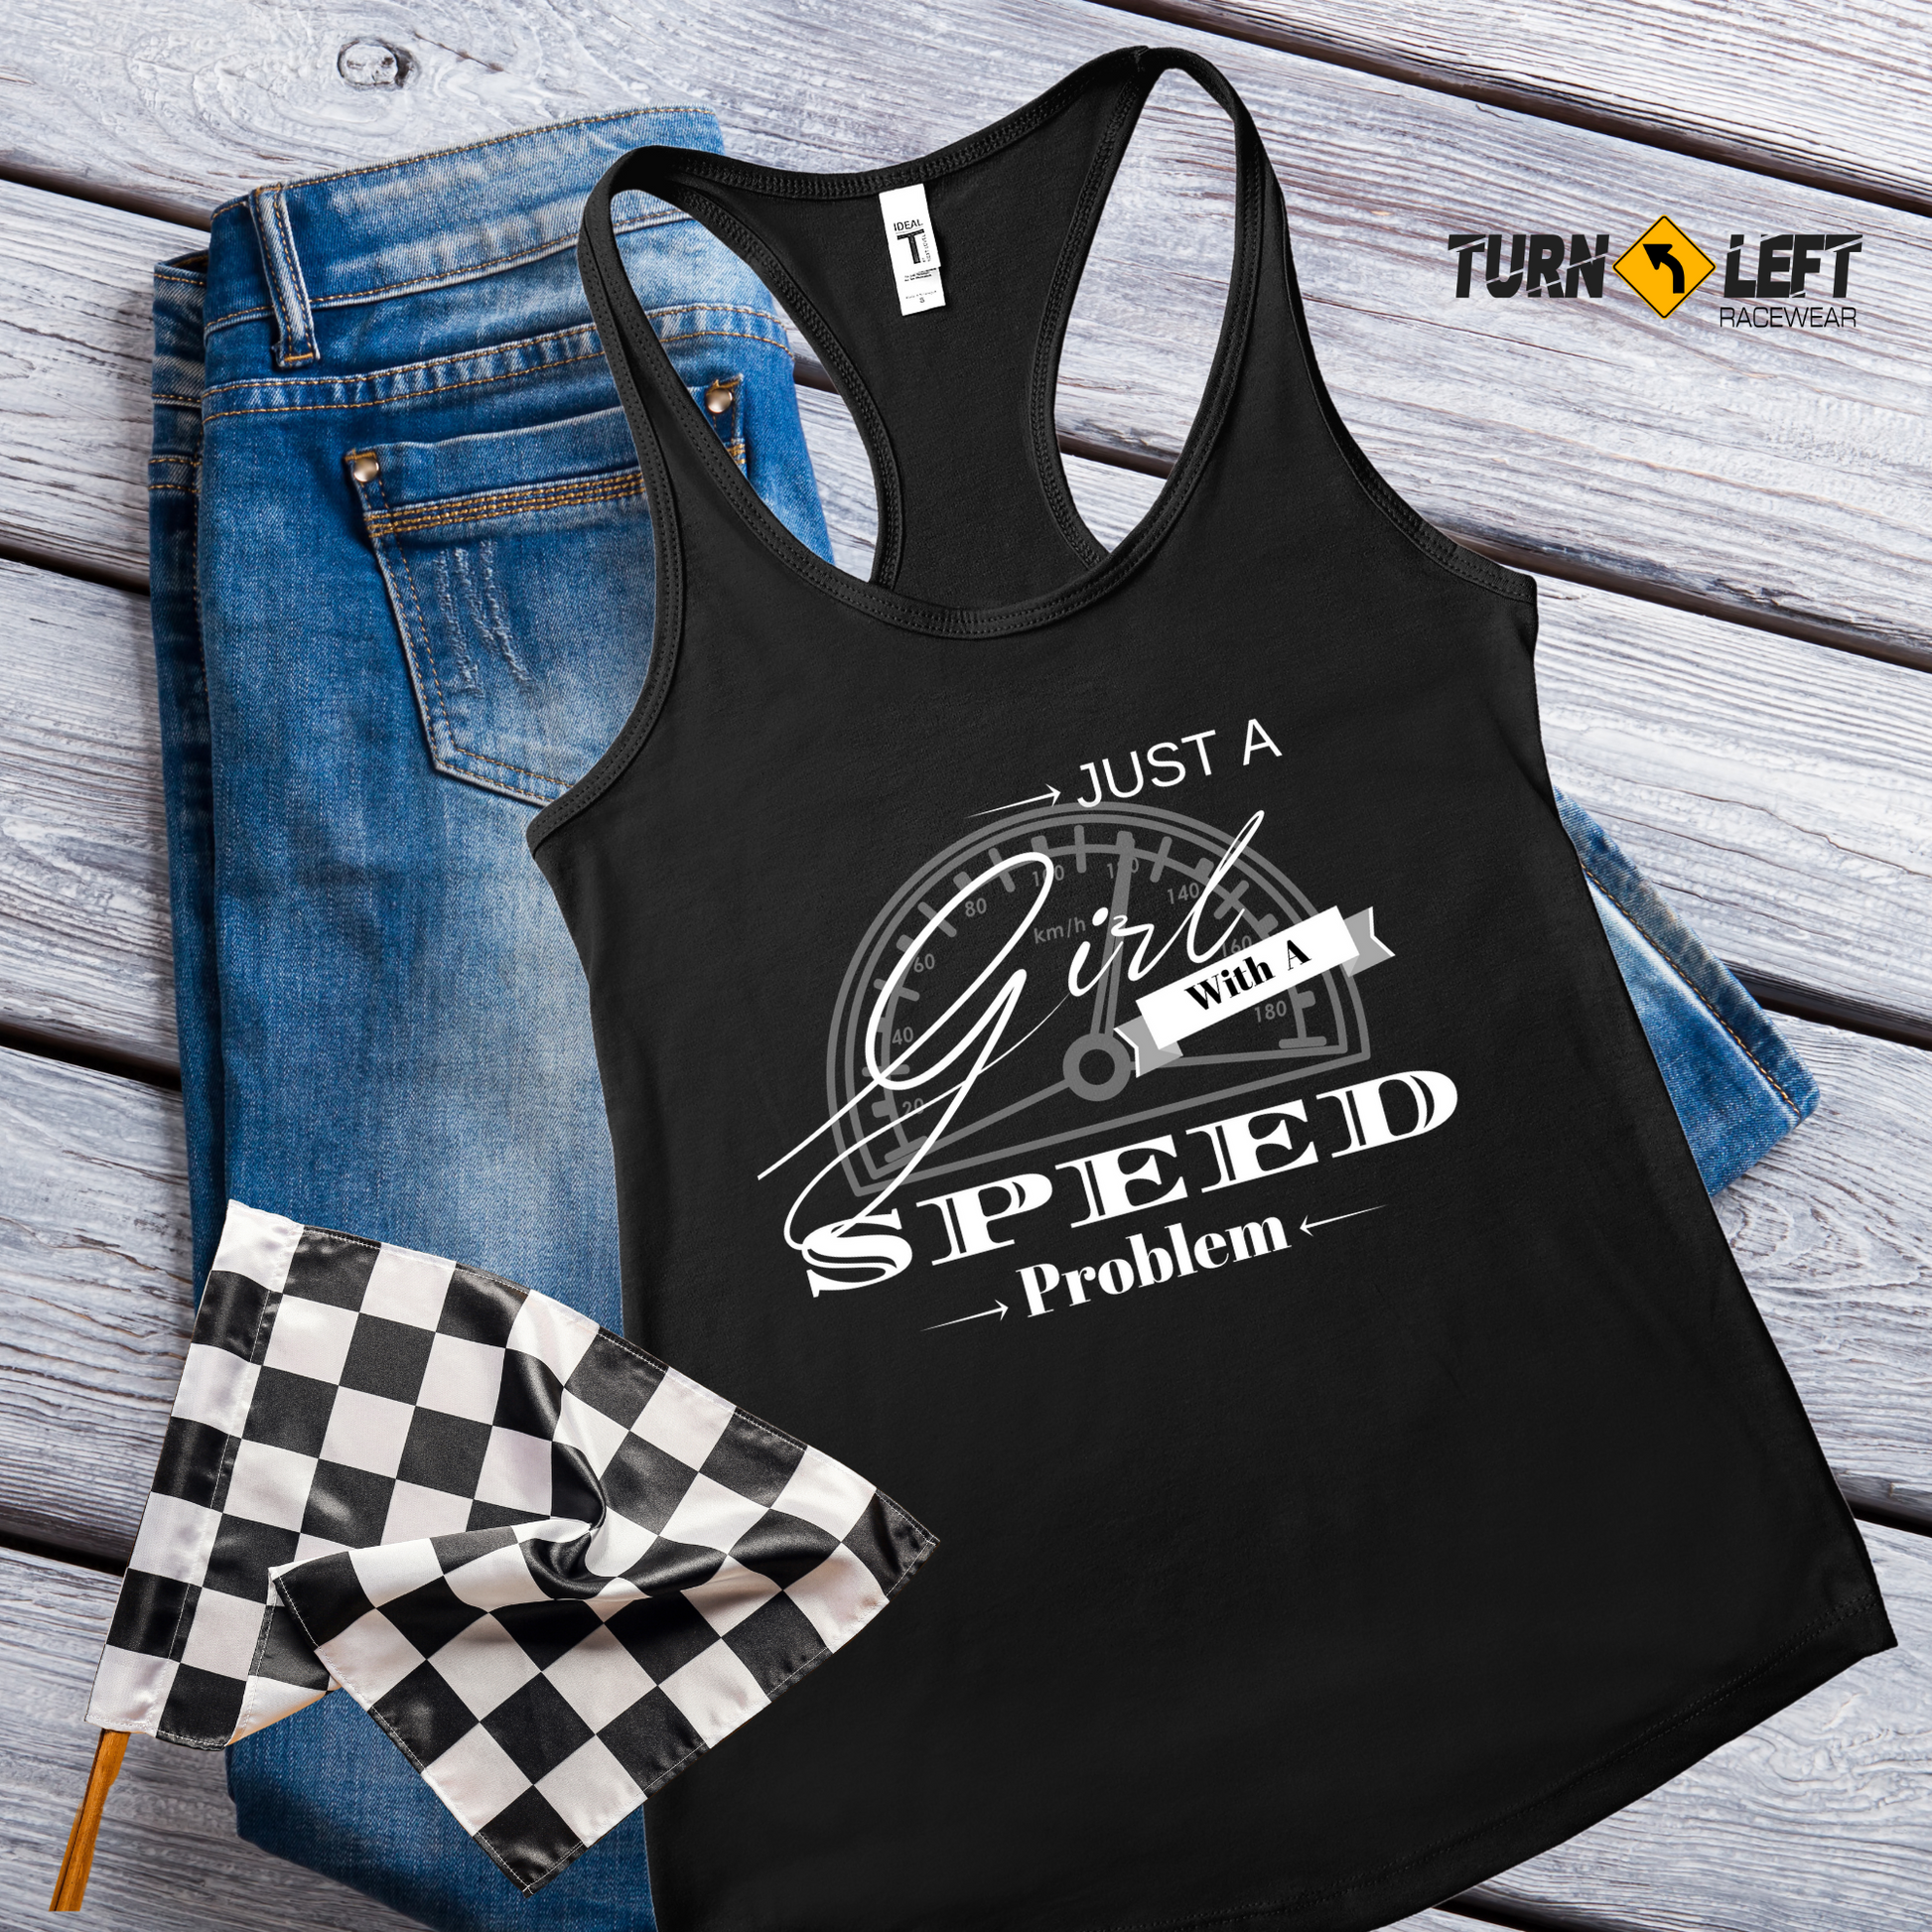 Women's Racing Tank Tops Speedway Racing Shirts For WomenJust A Girl With A Speed Problem